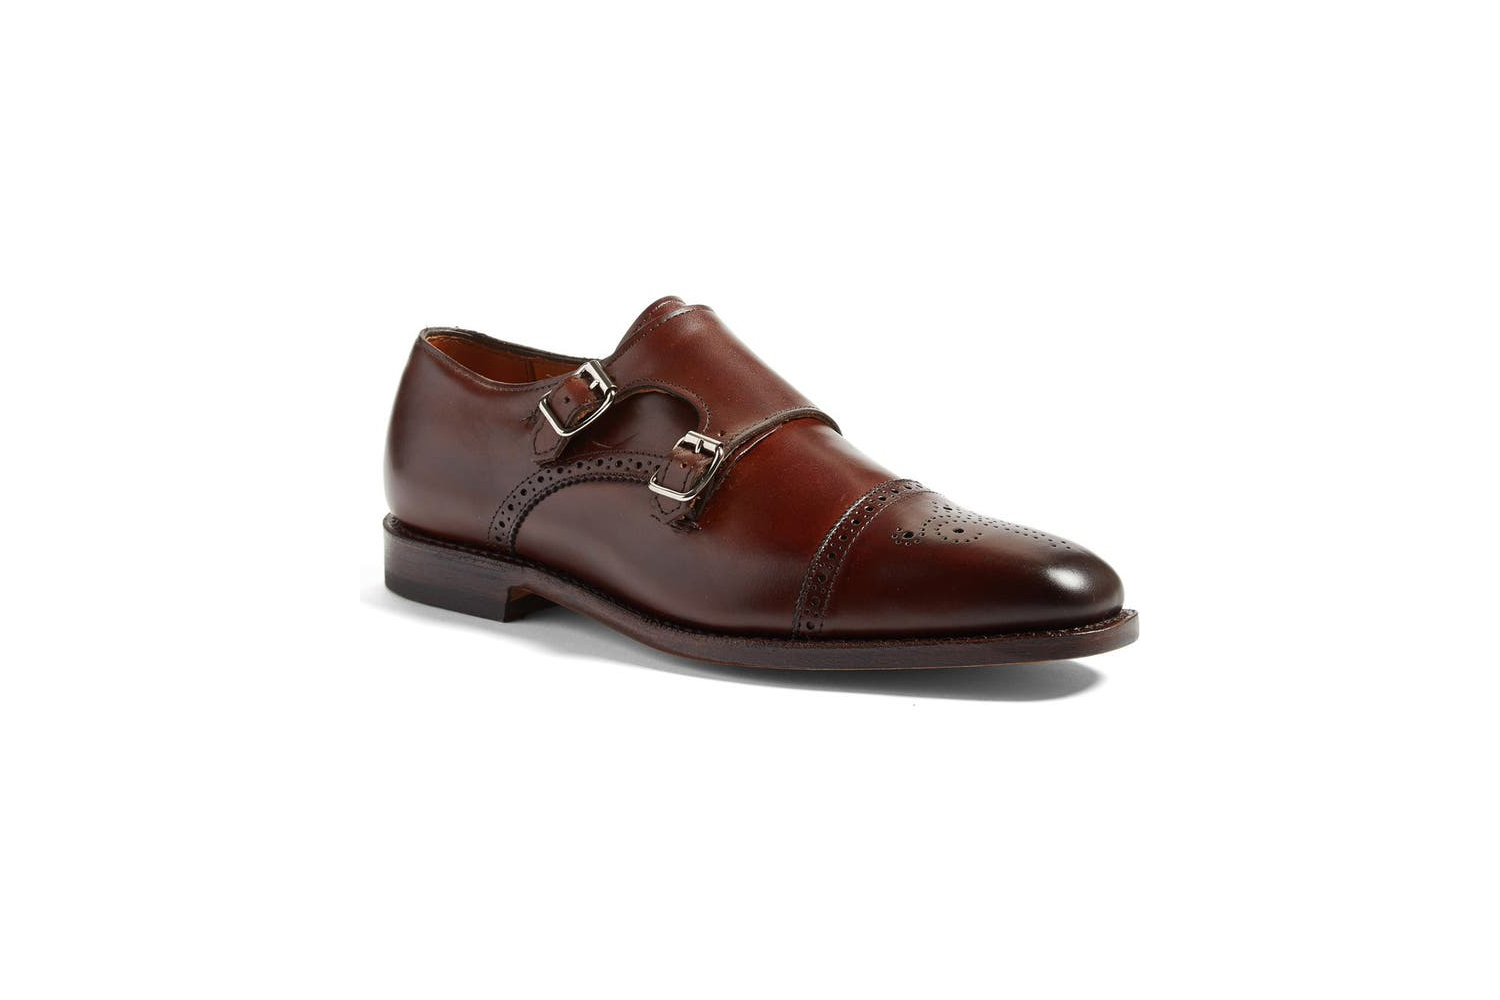 The 10 Best Monk Strap Shoes To Step Out in Style This Season - The Manual